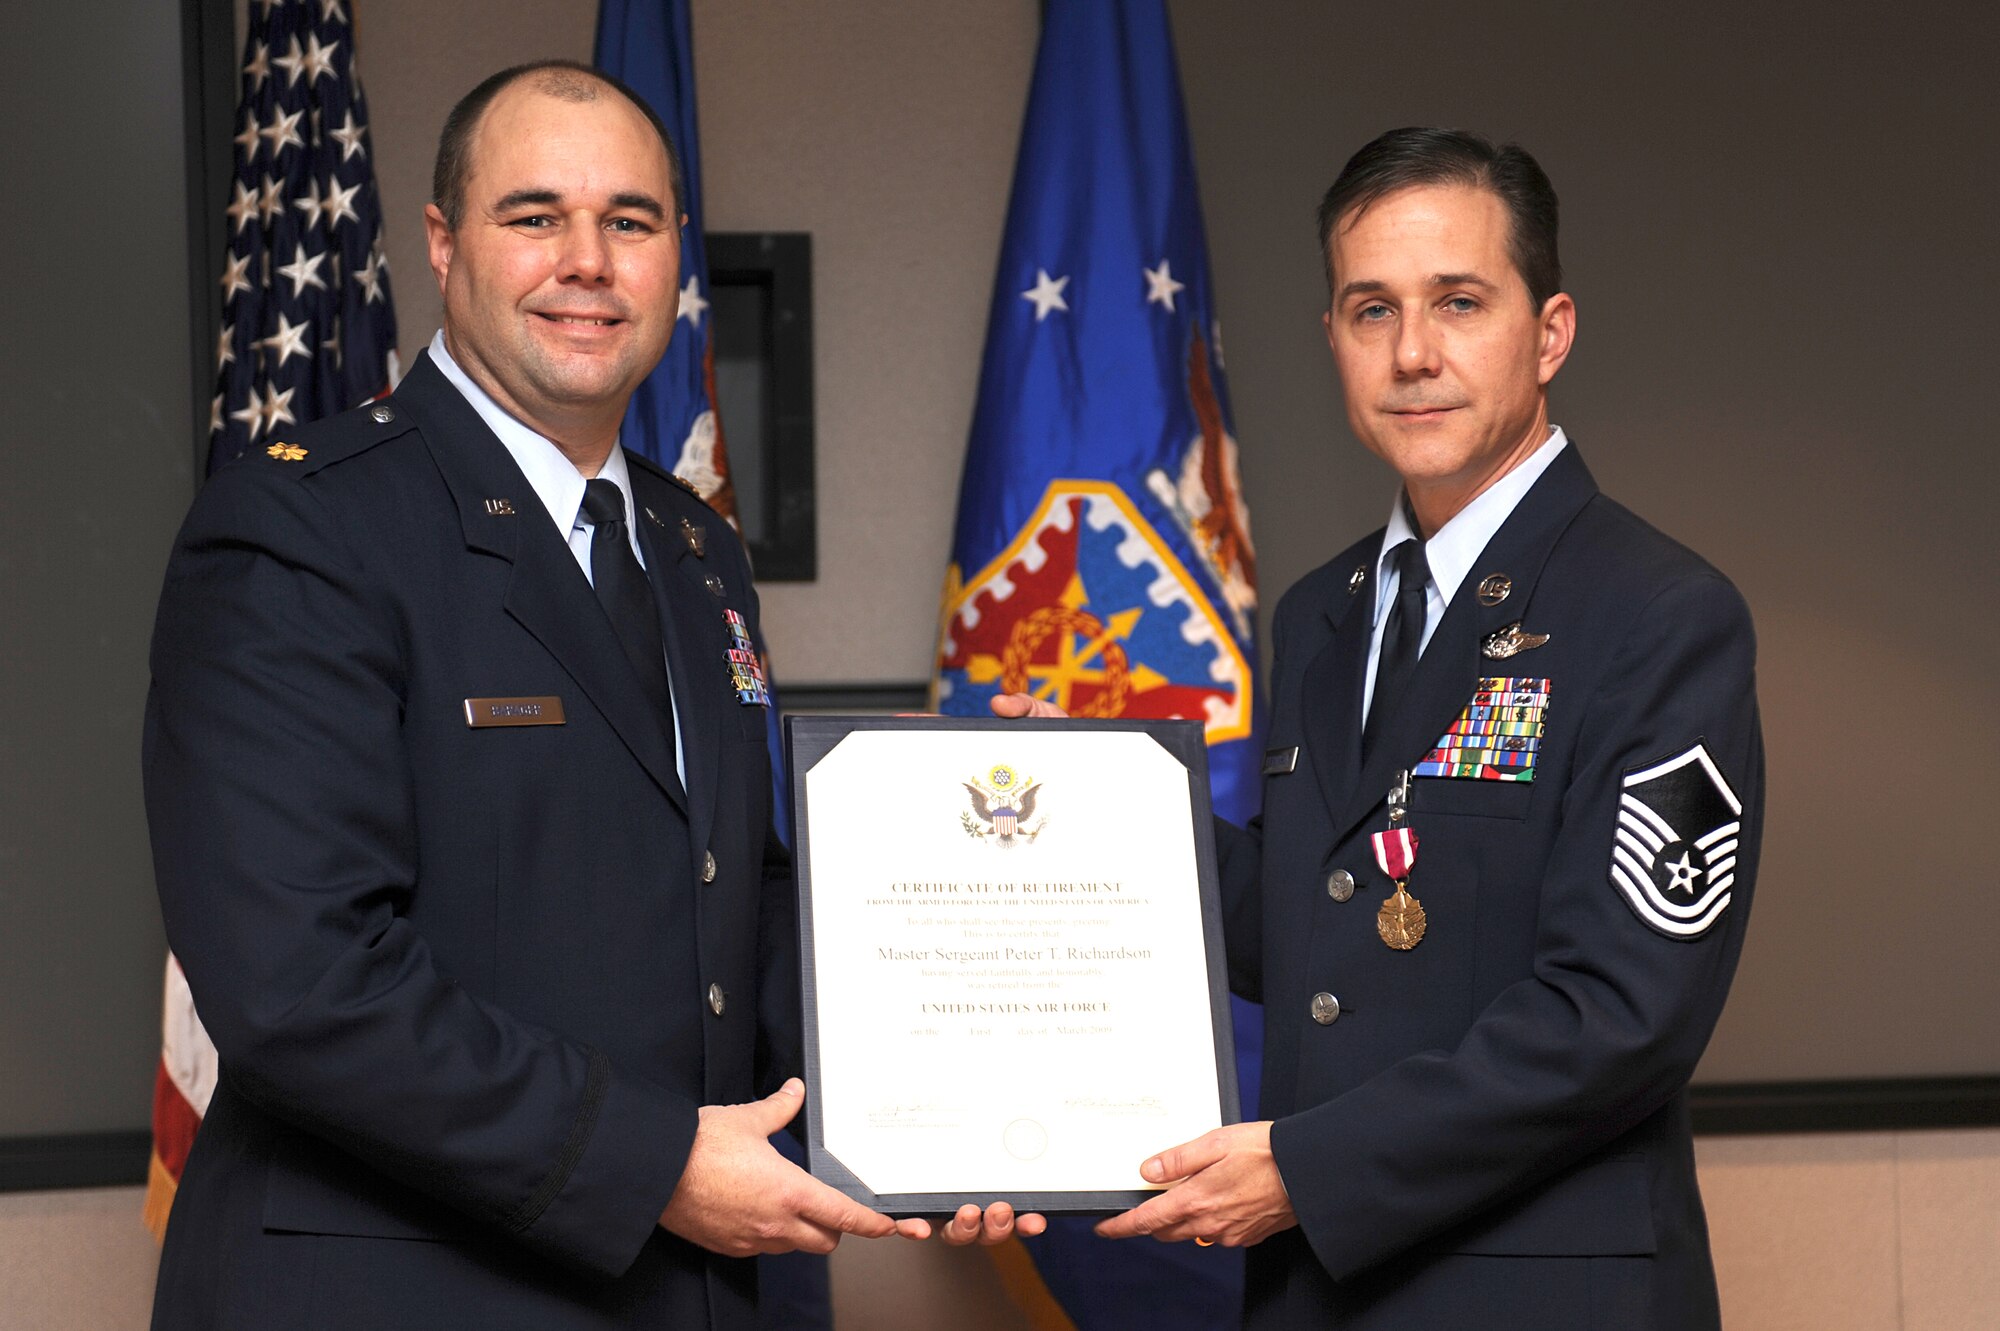 Maj. Robert Barager, Expeditionary Operations School, presents a retirement certificate to Master Sgt. Peter Richardson during his retirement ceremony in the U.S. Air Force Expeditionary Center on Fort Dix, N.J., Jan. 9, 2009.  Sergeant Richardson was a command tactician for the Combat Aircrew Tactics Studies Course.  He was then selected to fulfill the position of course director for the CATS Course in his last years at the Expeditionary Center. (U.S. Air Force Photo/Staff Sgt. Nathan Bevier)